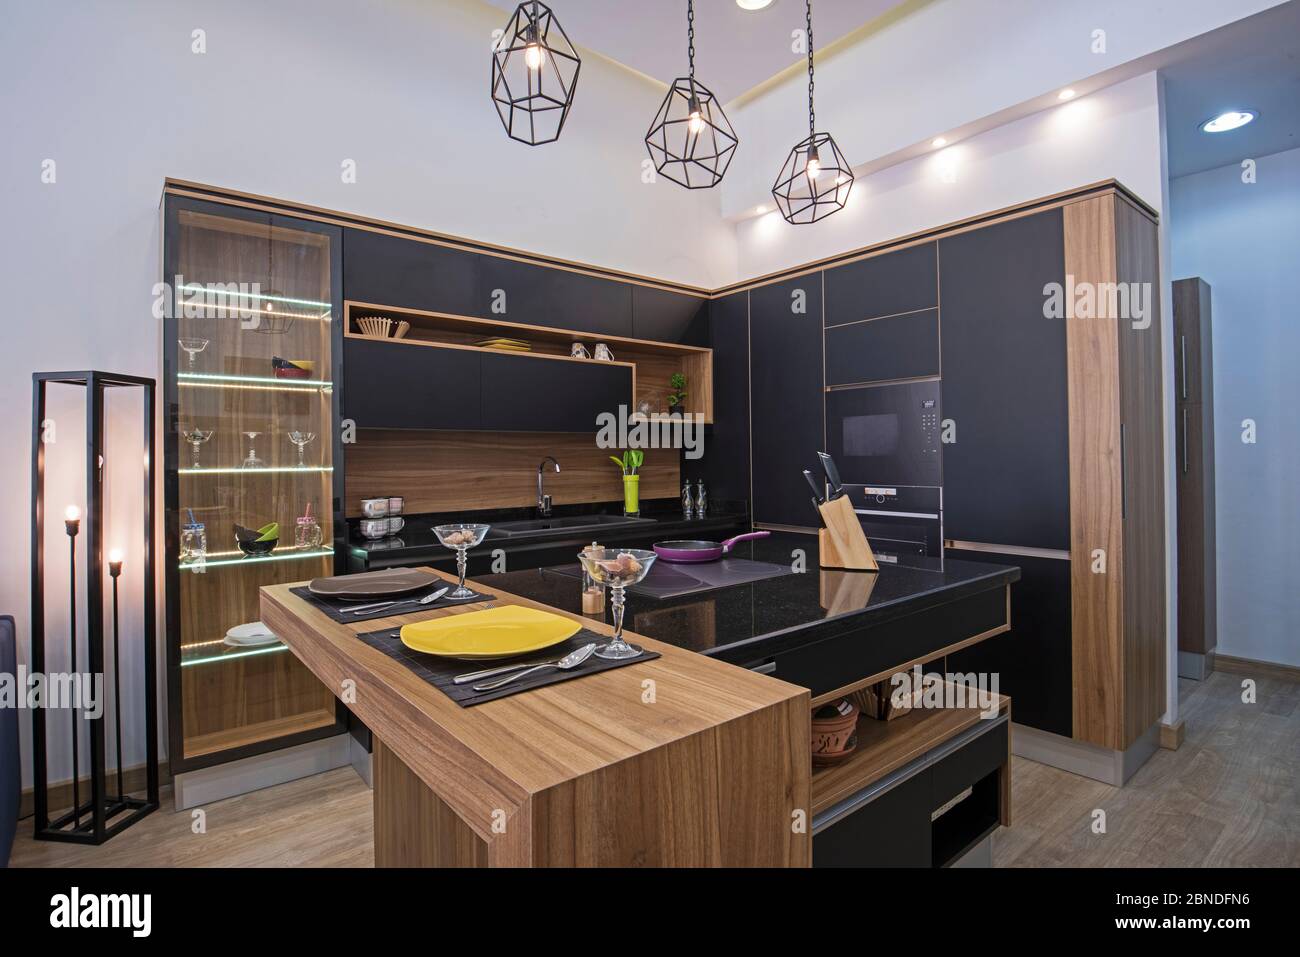 Interior design decor showing modern kitchen with cupboards and island in luxury apartment showroom Stock Photo